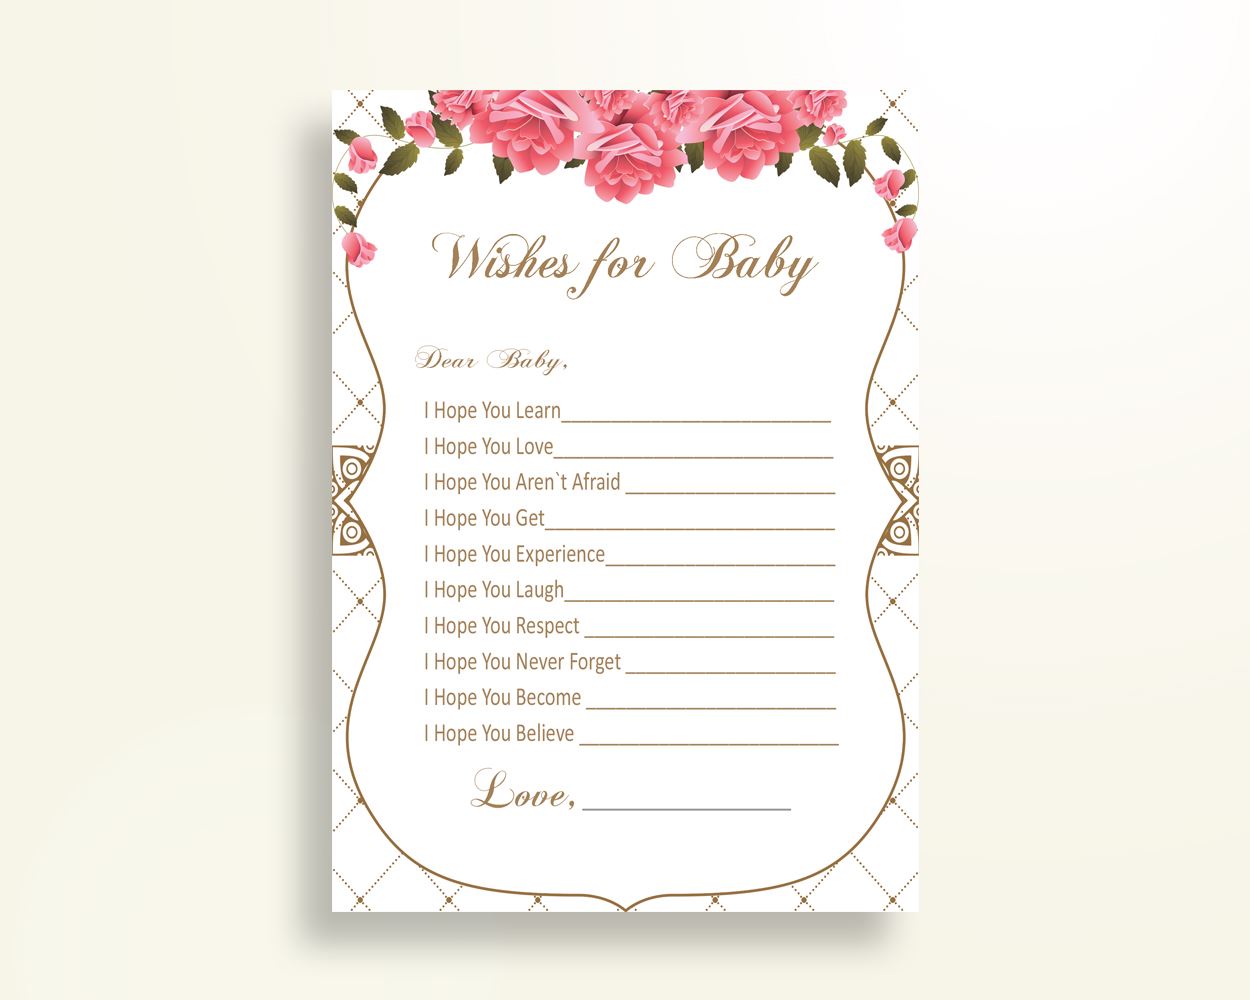 Wishes For Baby Baby Shower Wishes For Baby Roses Baby Shower Wishes For Baby Baby Shower Roses Wishes For Baby Pink White prints U3FPX - Digital Product